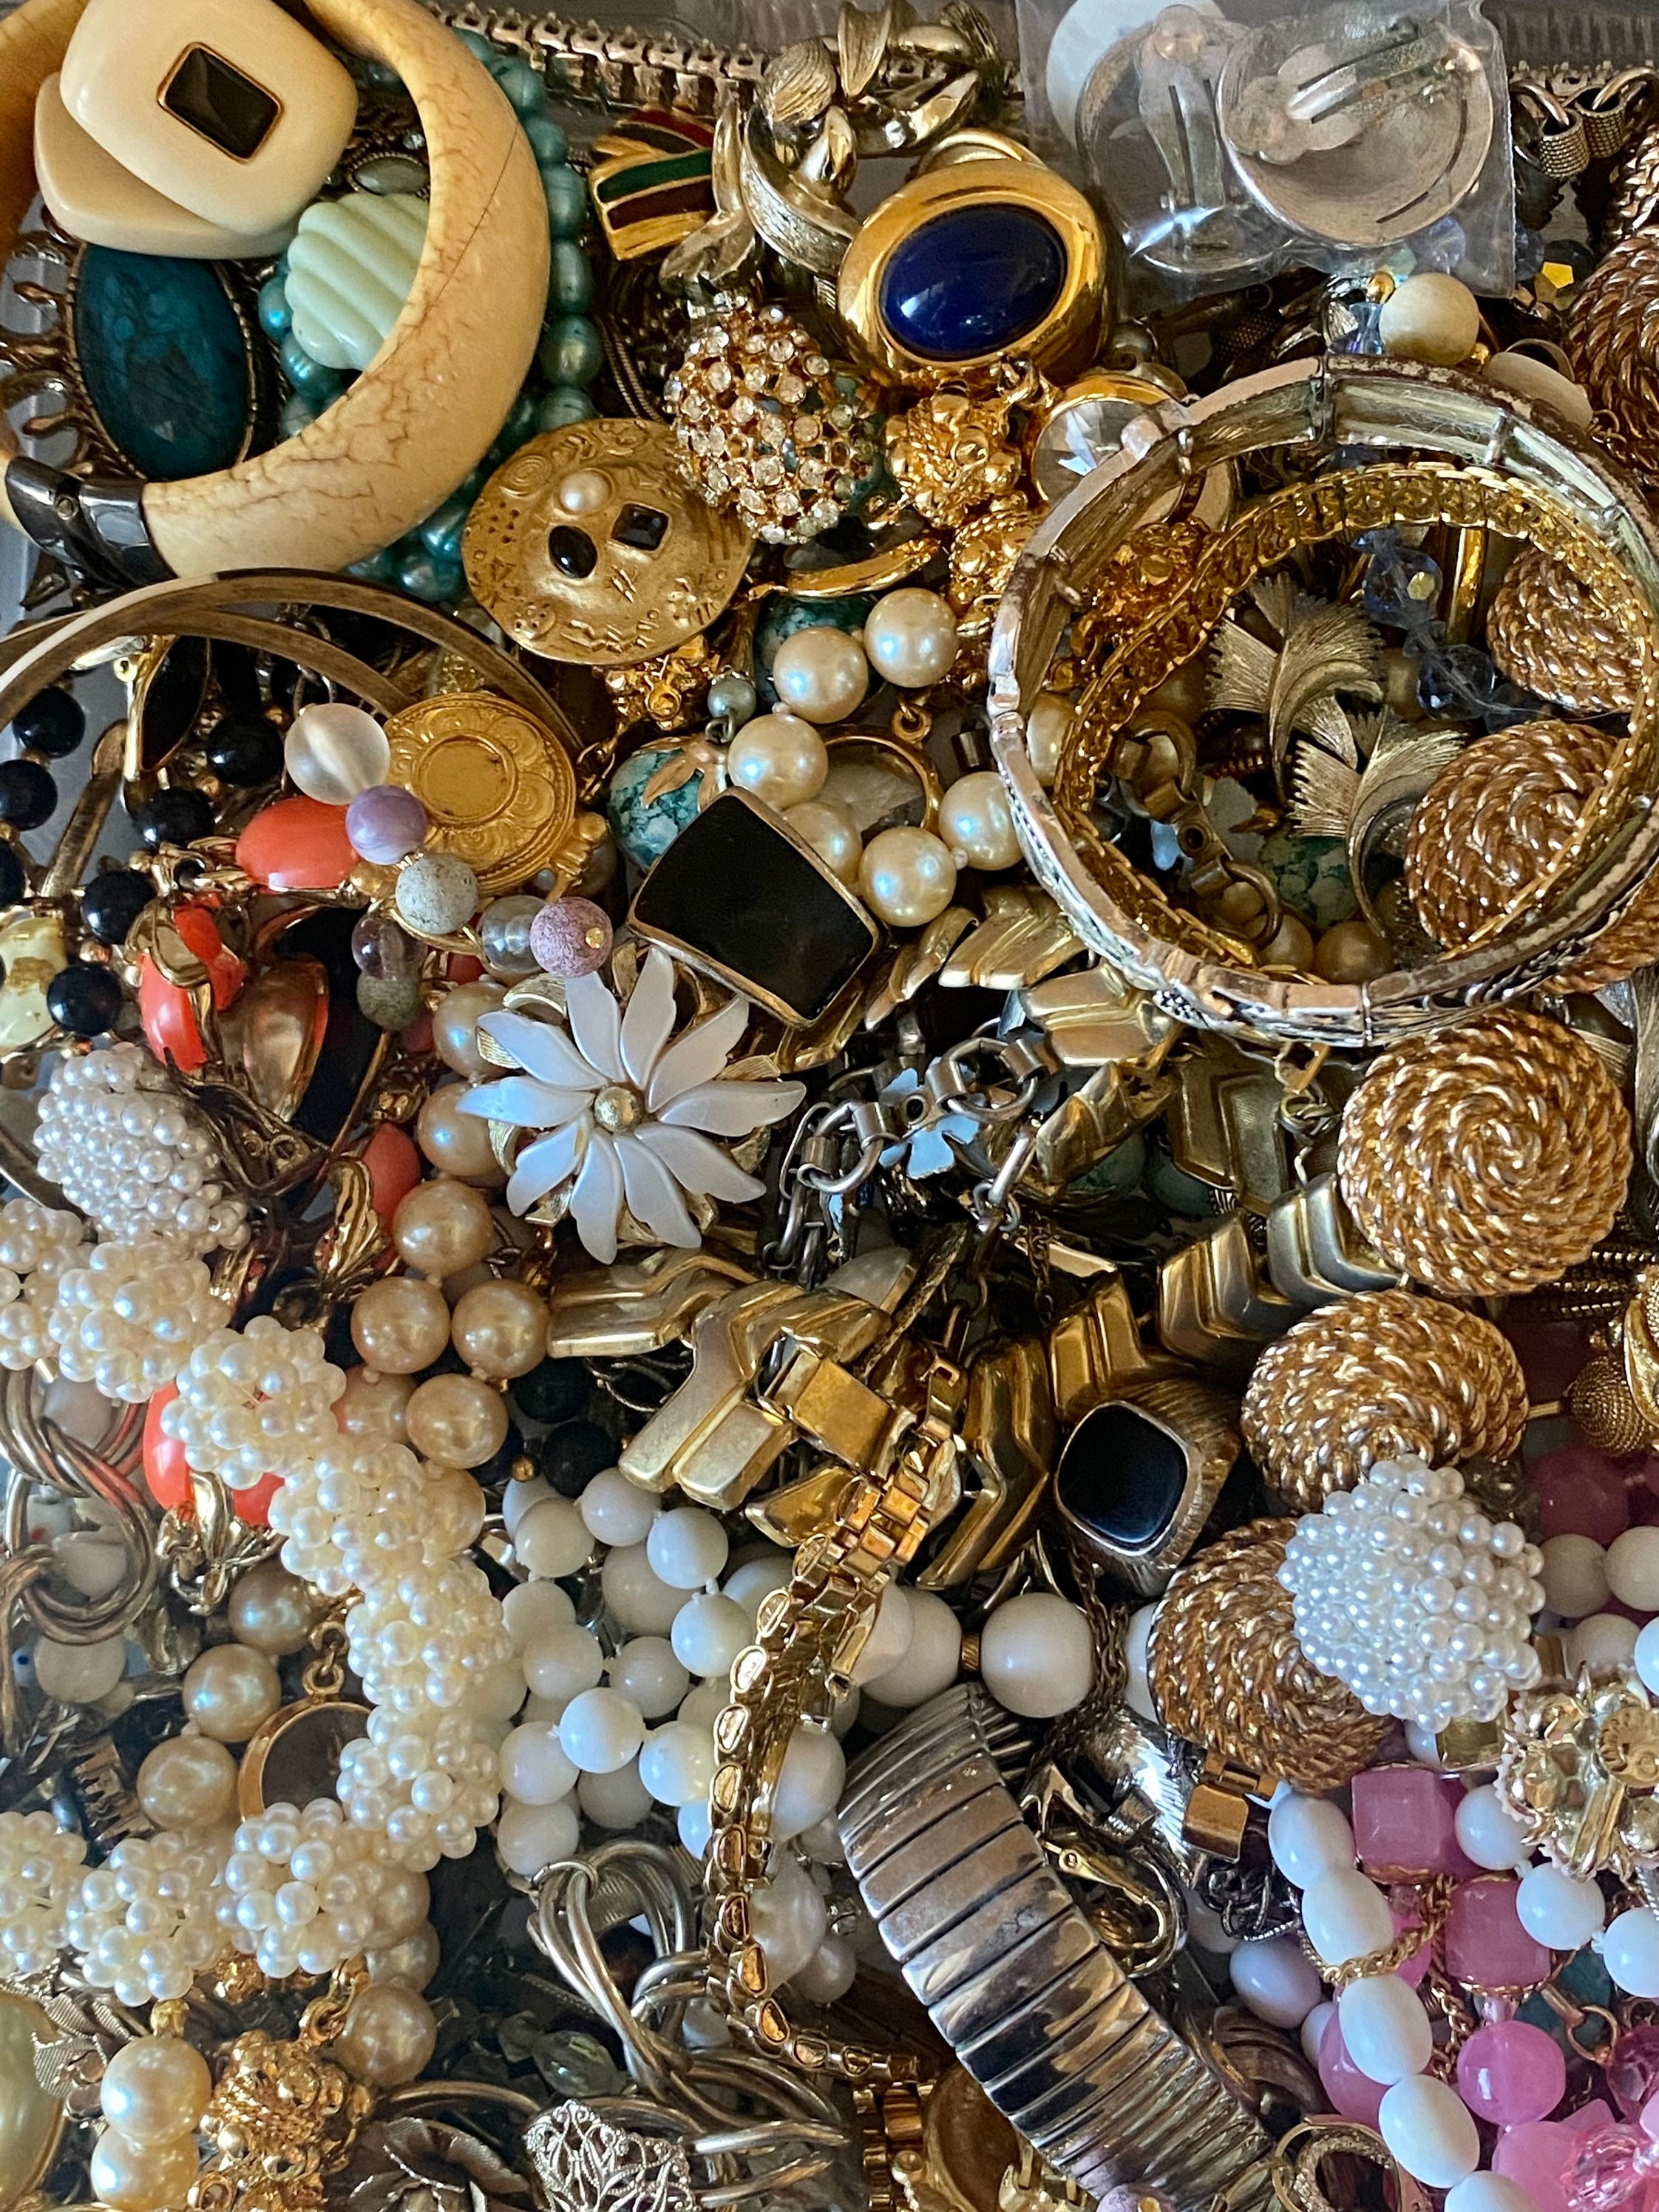 Vintage jewelry Mystery & Fun! Costume jewelry lot/bulk jewelry! You  should NOT expect to receive exactly what is pictured in this photo!